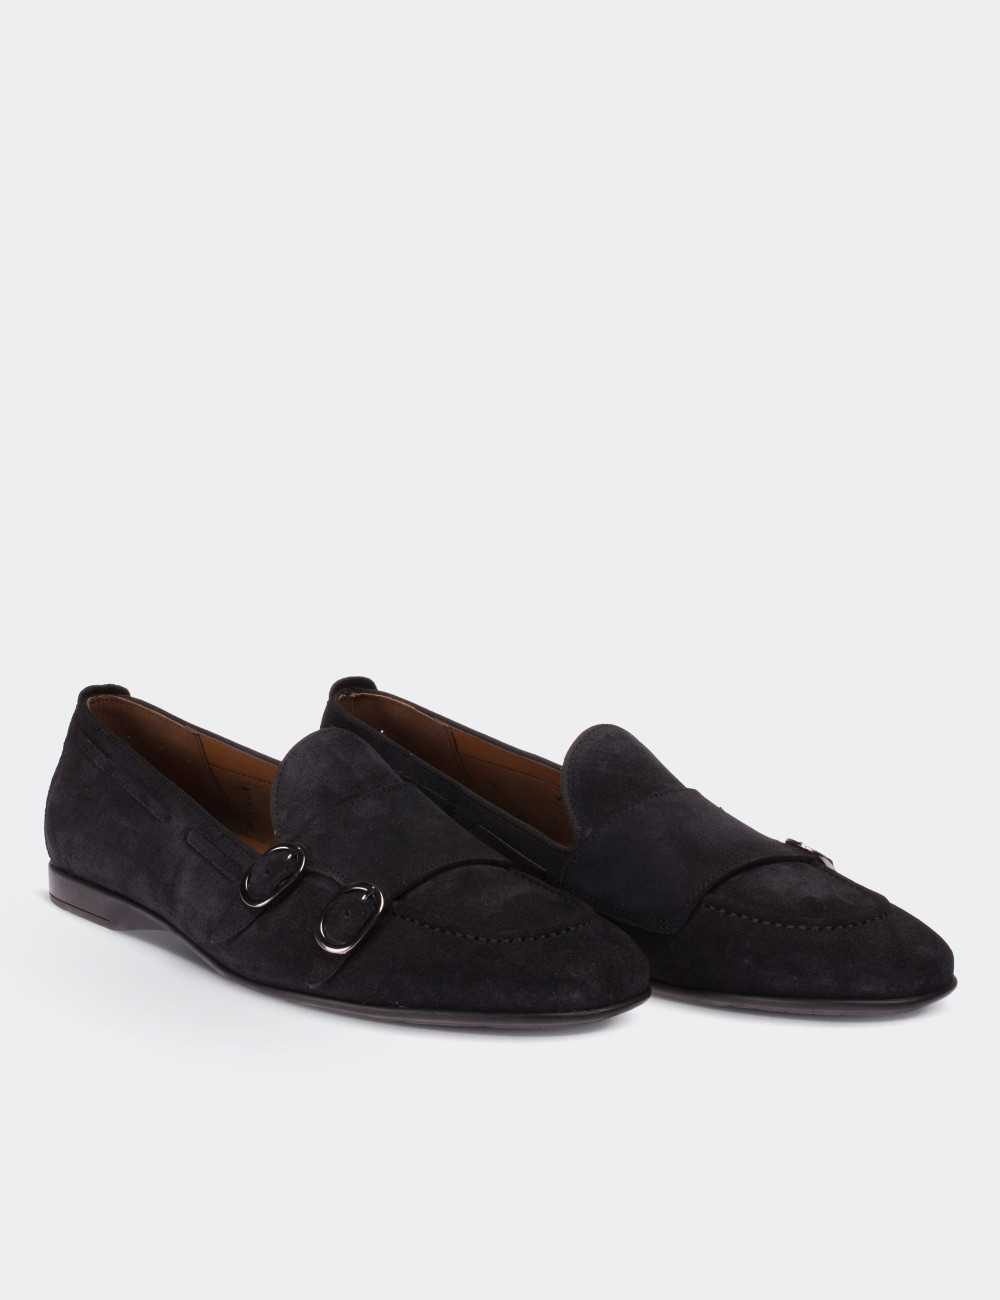 Navy Suede Leather Loafers - Deery